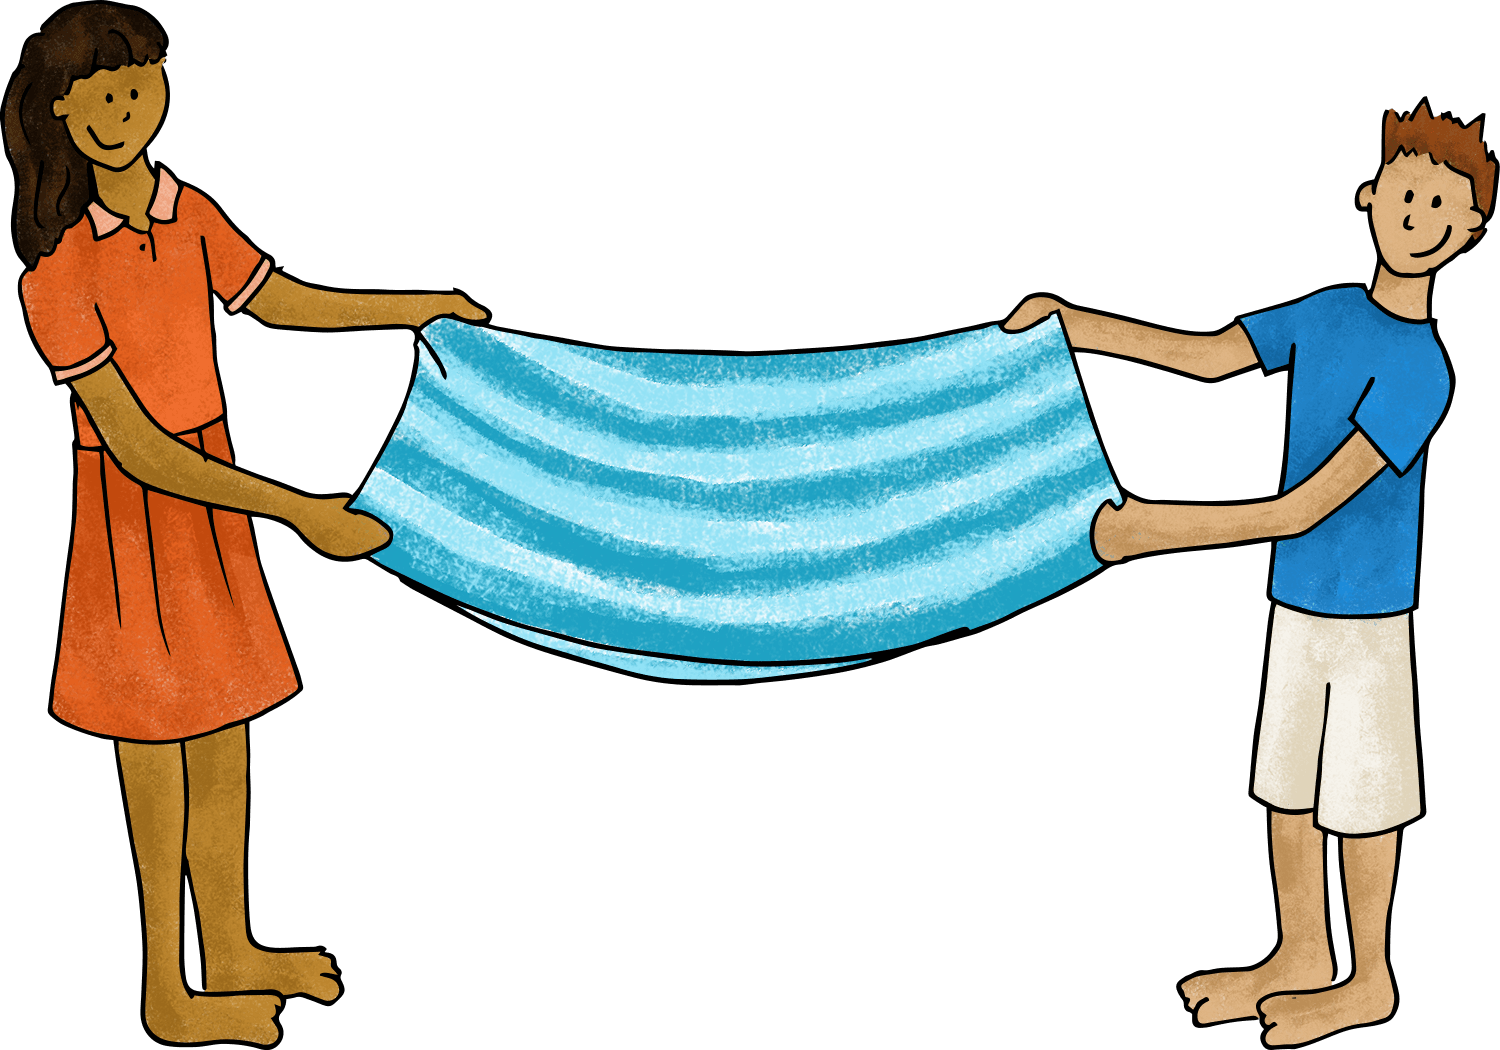 If You Put A Water Balloon In One Pair's Beach Towel, - If You Put A Water Balloon In One Pair's Beach Towel, (1500x1050)